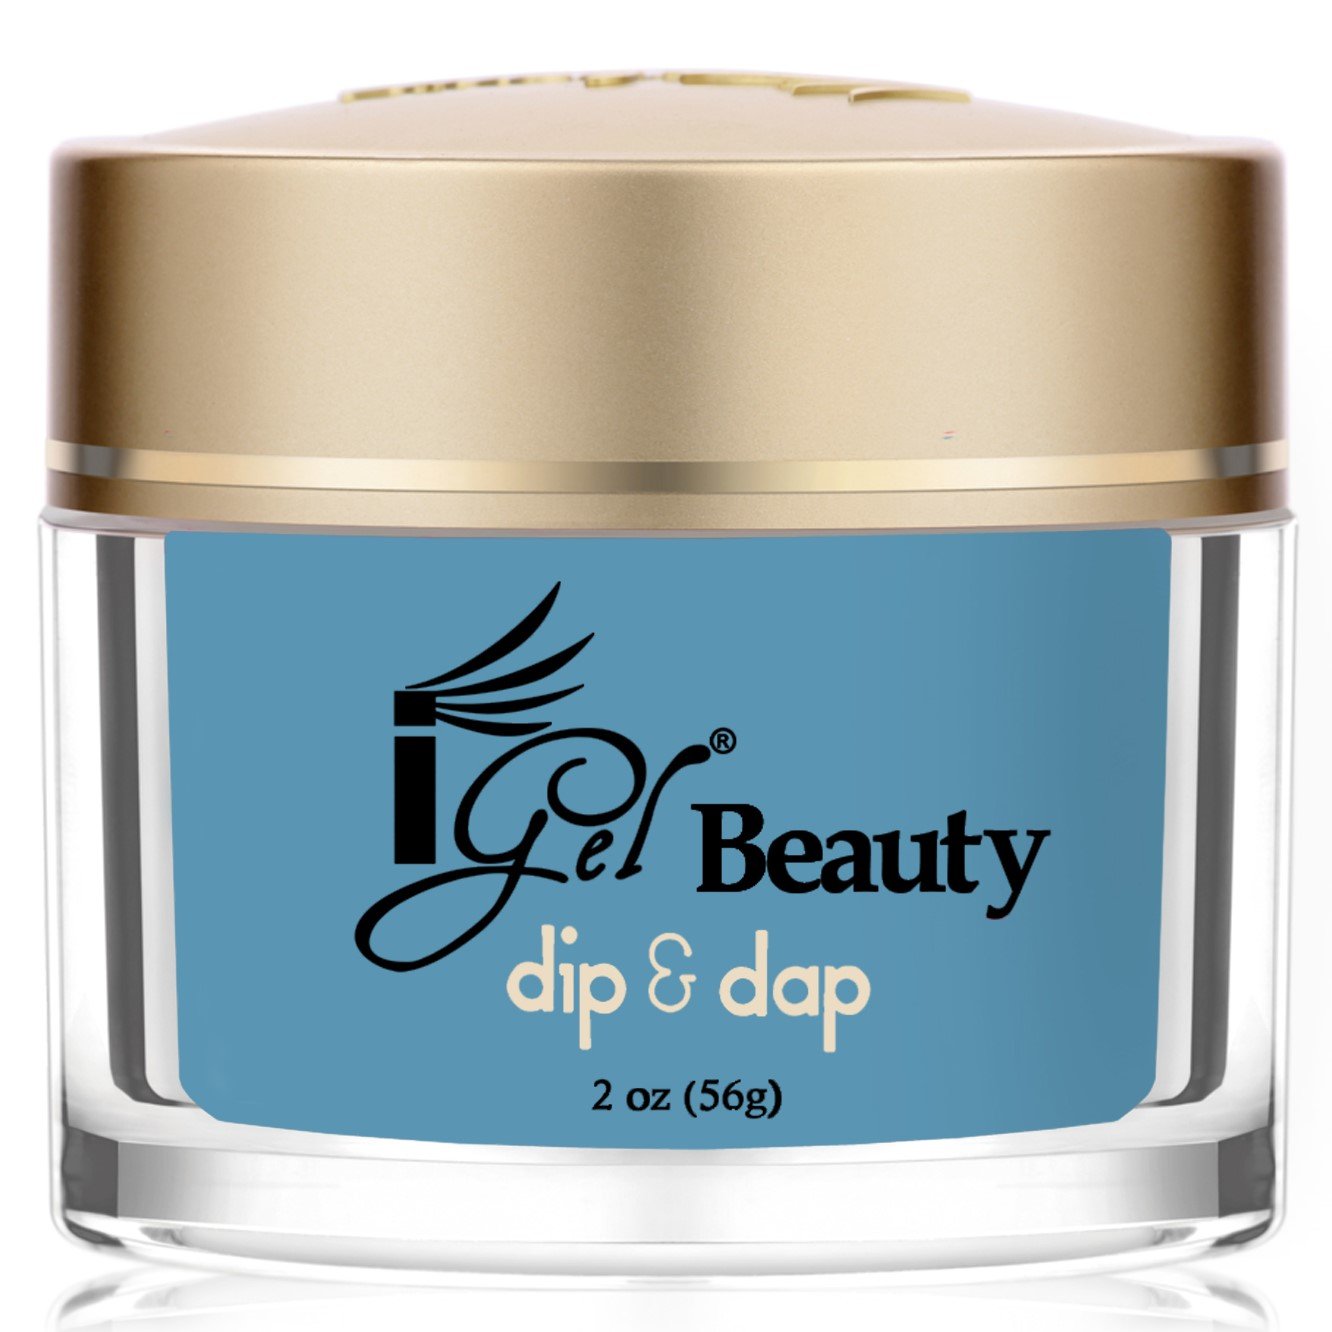 iGel Beauty - Dip & Dap Powder - DD122 Atmospheric - RECOMMENDED FOR DIP